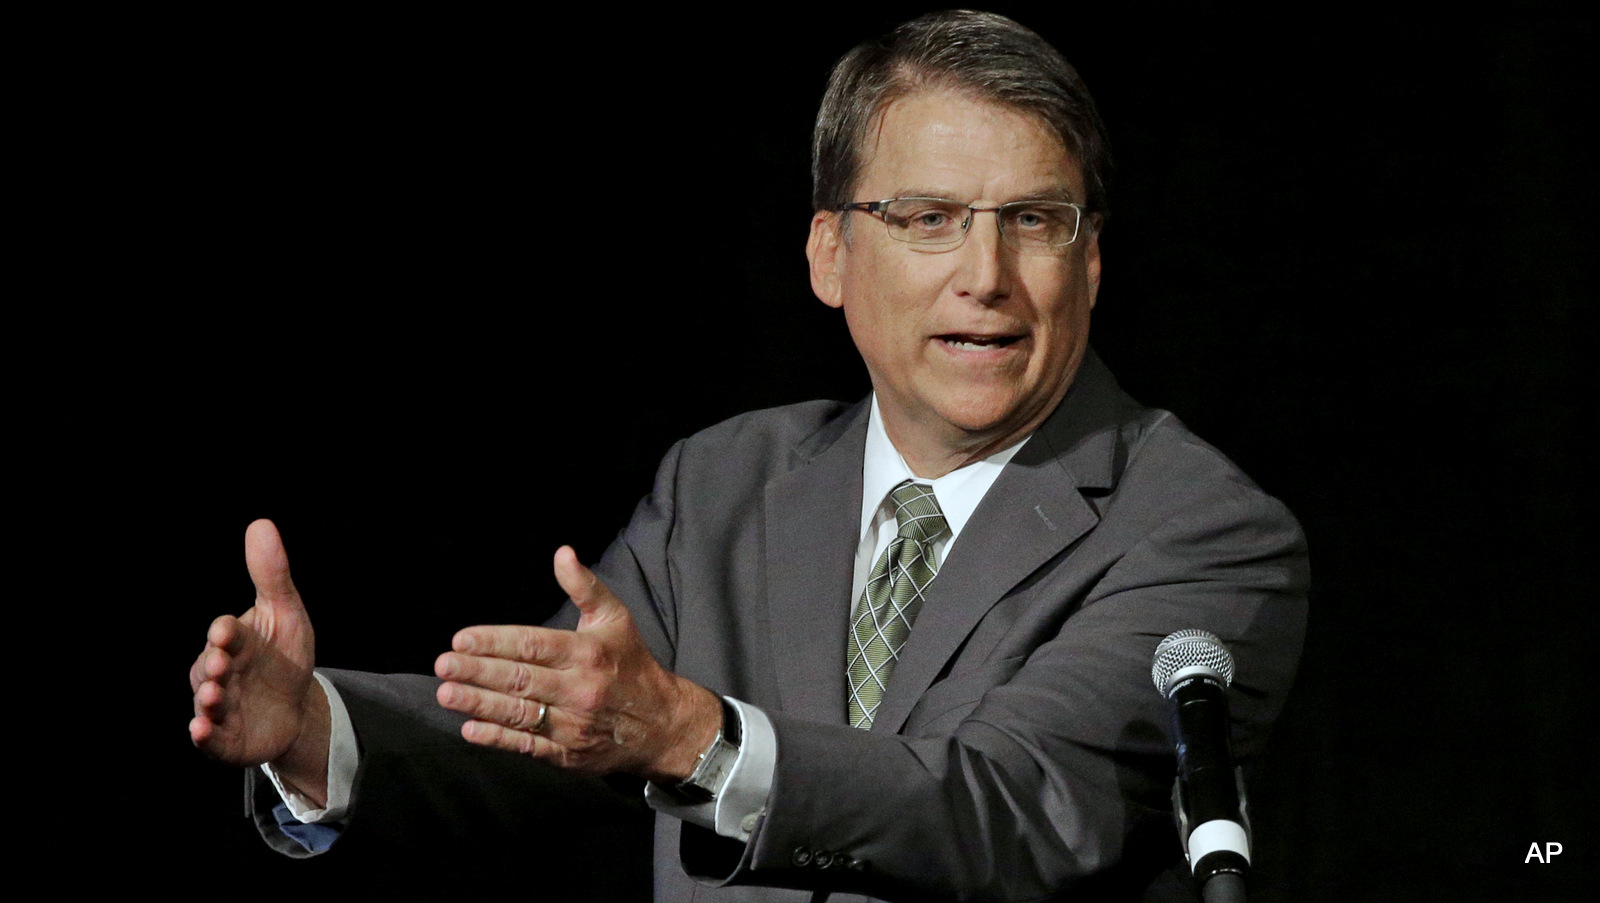 North Carolina Gov. Pat McCrory speaks during a candidate forum in Charlotte, N.C.